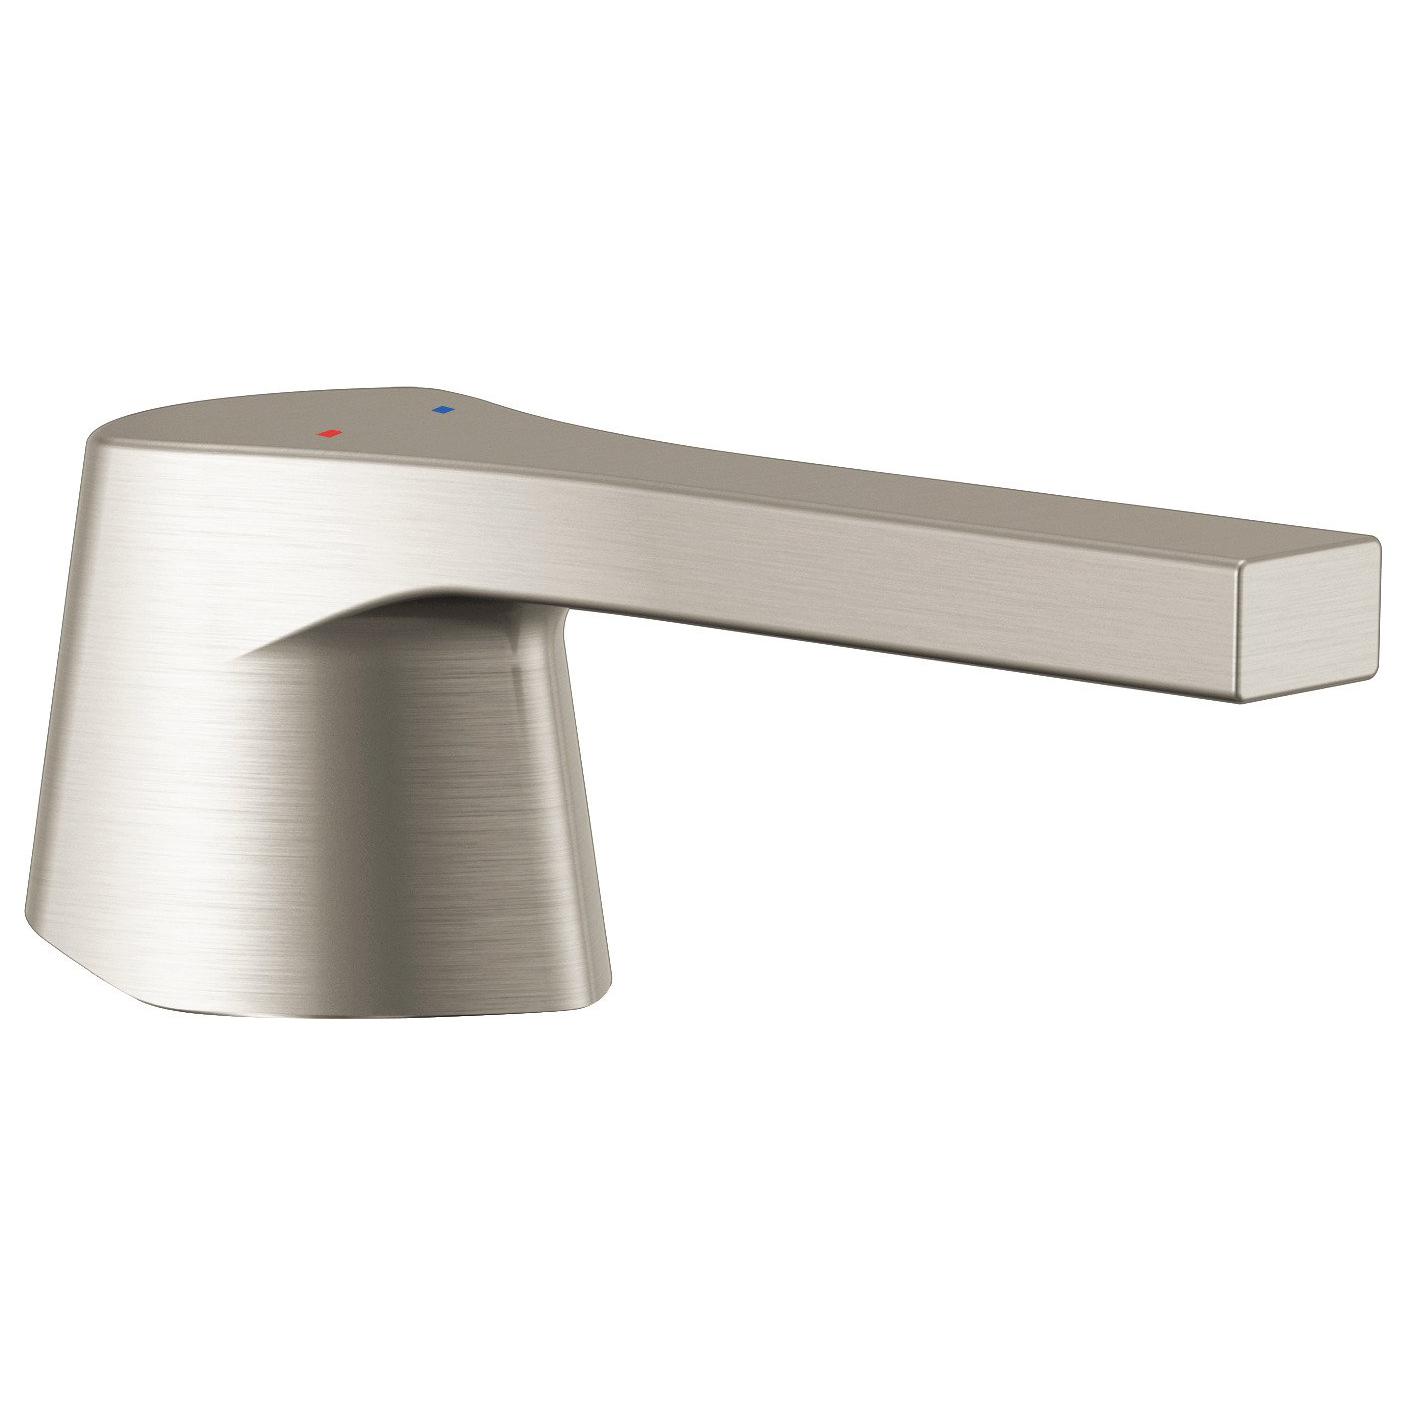 Zura Metal Lever Handle w/Indicators in Stainless